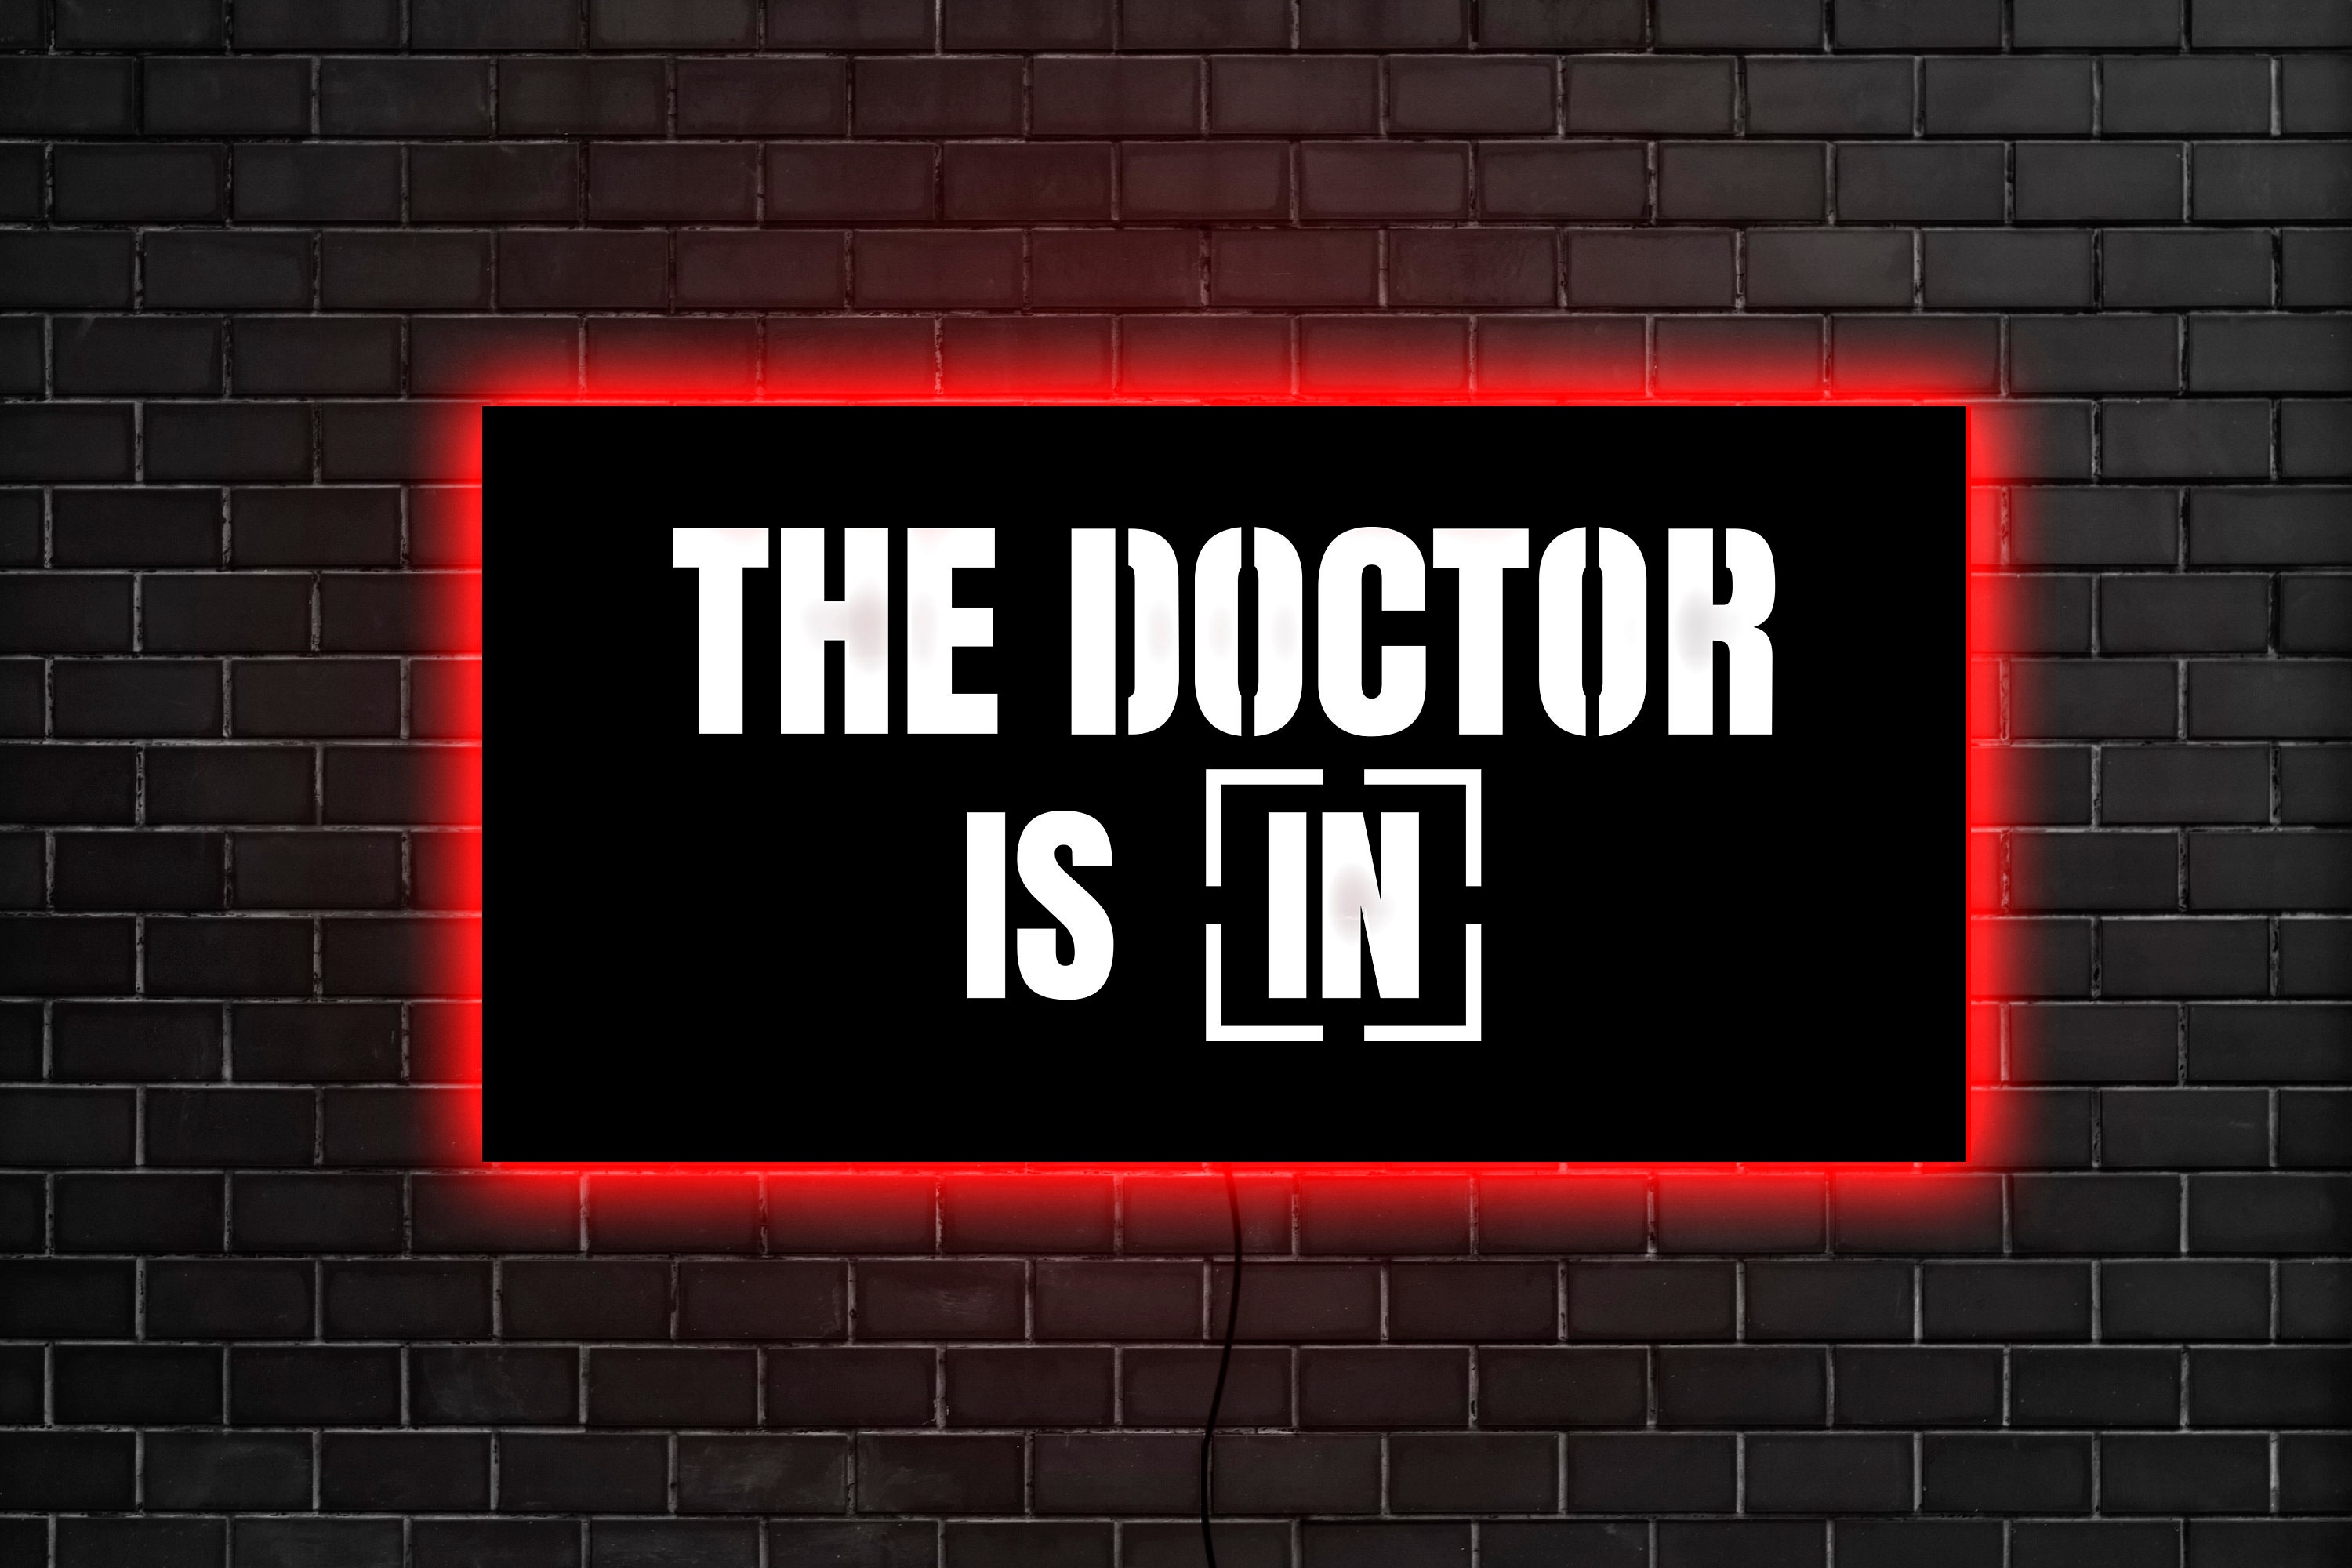 The Doctor is IN!